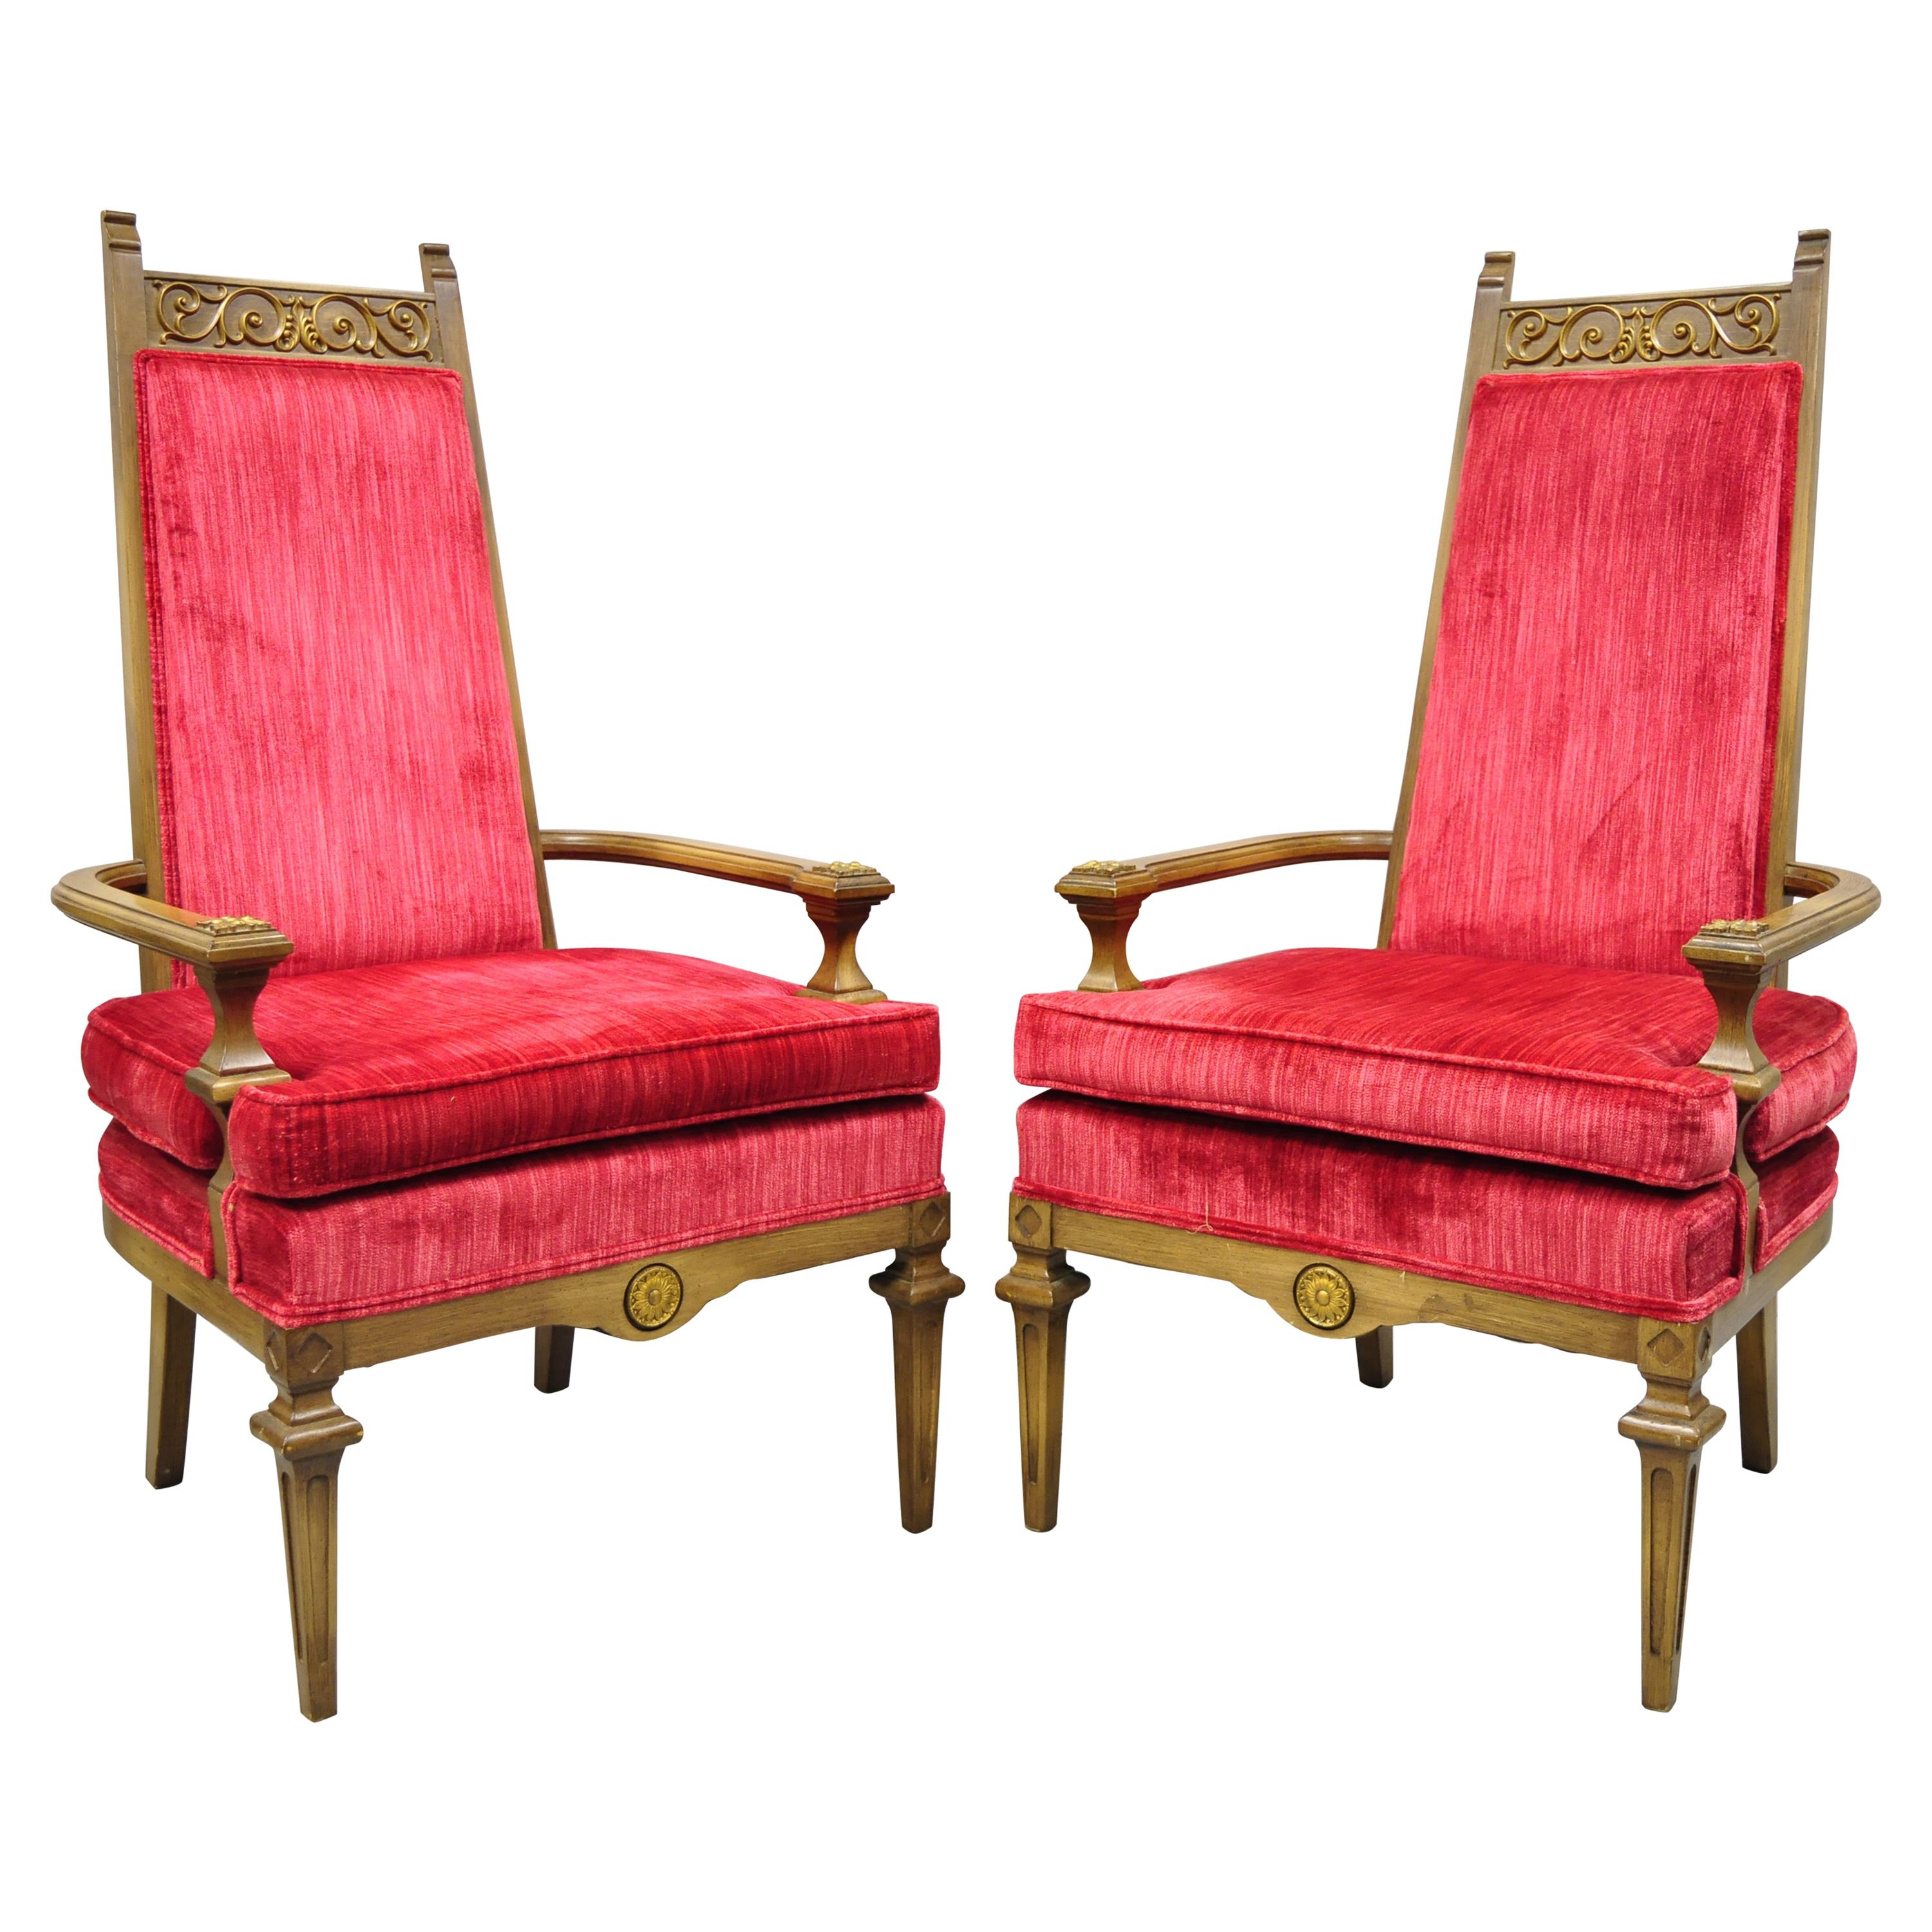 Vintage Italian Hollywood Regency Red High Back Lounge Arm Chairs, a Pair